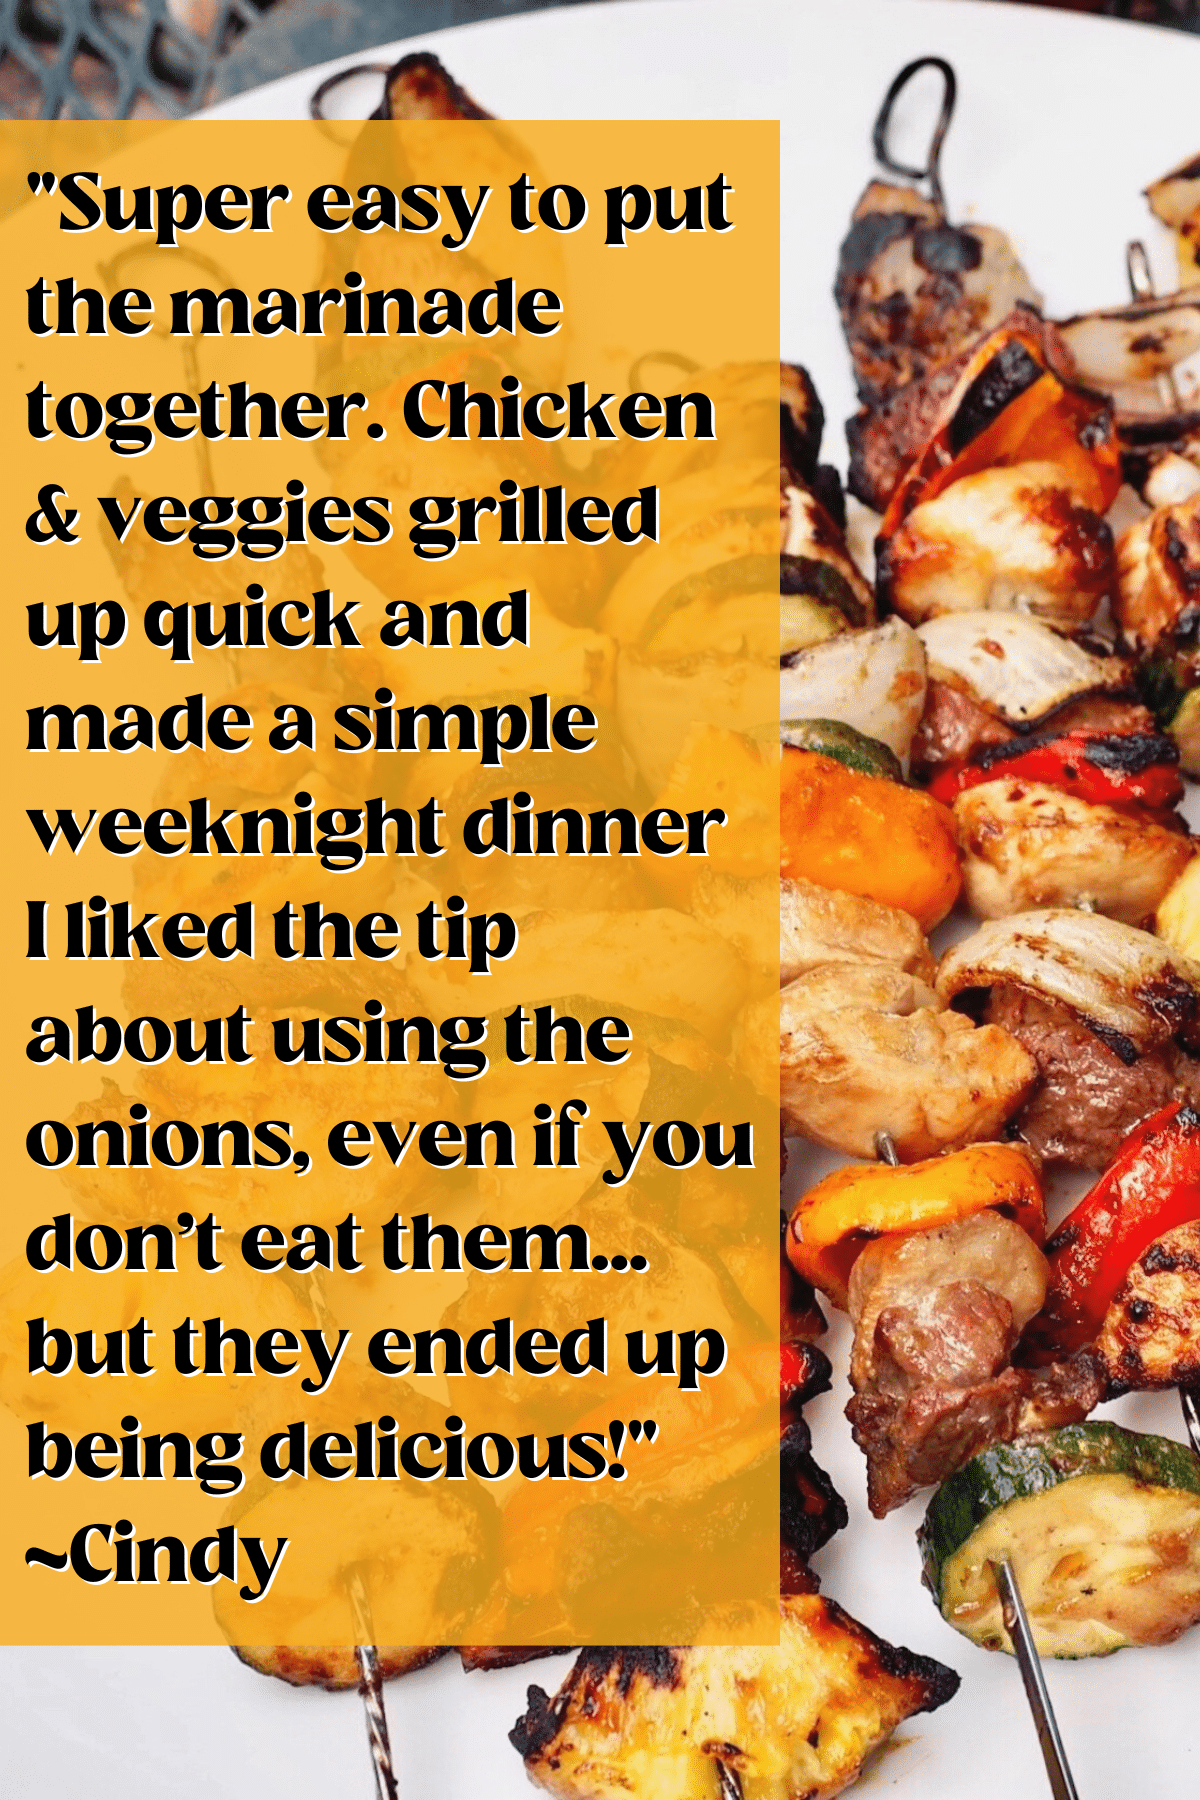 Image of shish kebabs on grill with quote about how easy the marinade is. 